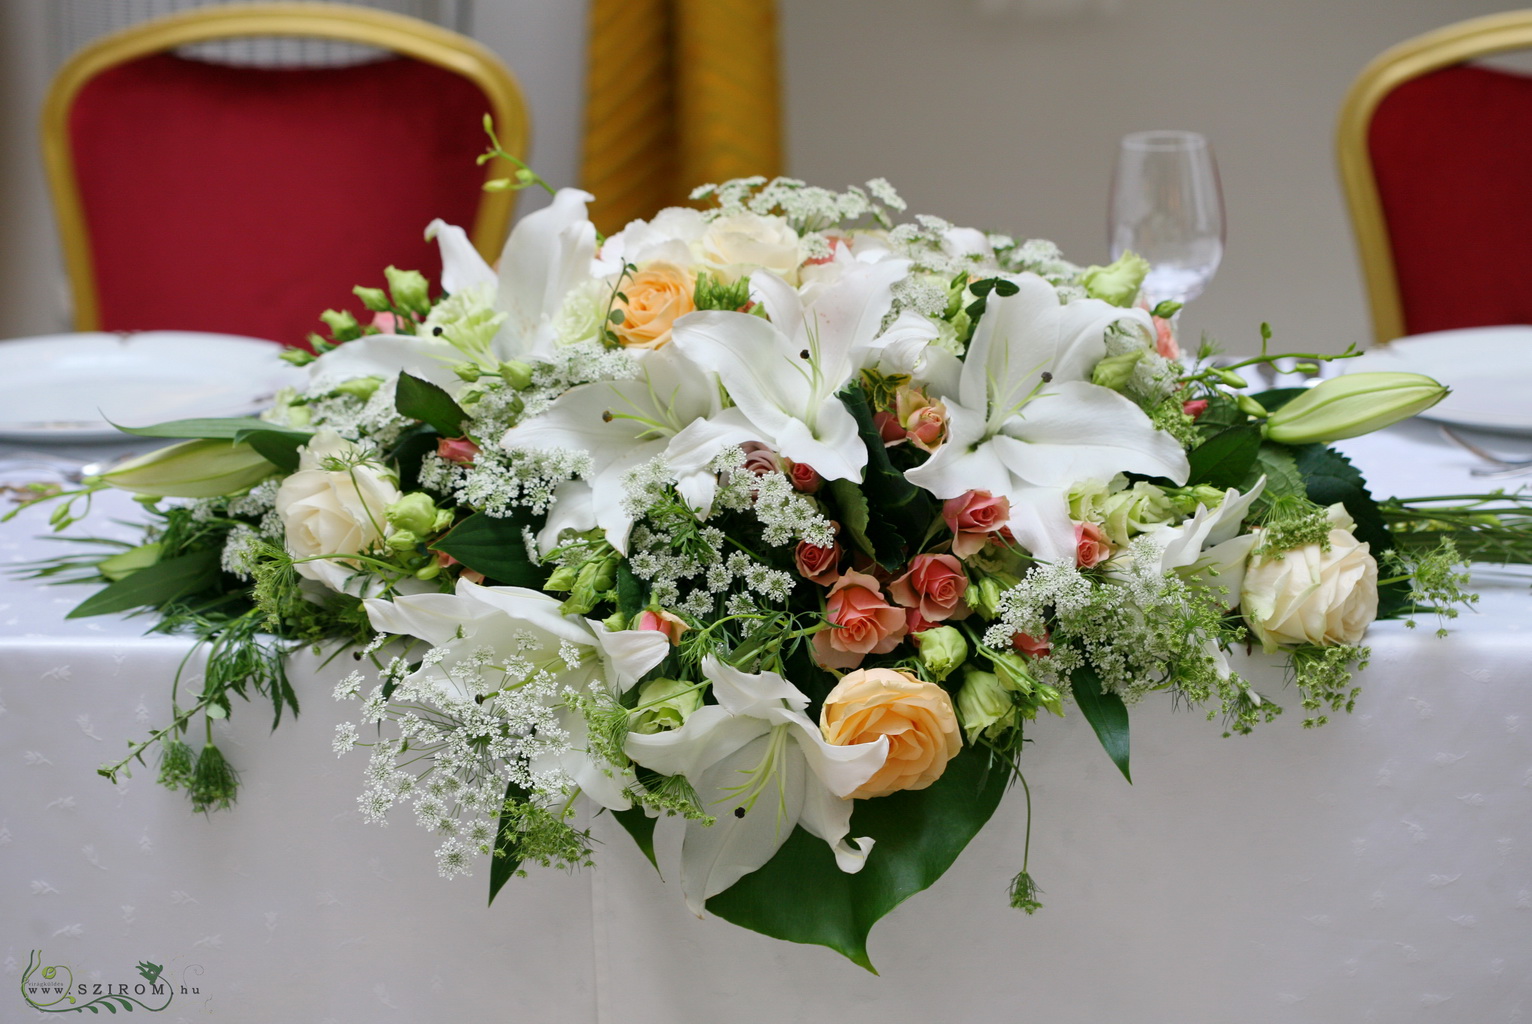 flower delivery Budapest - Main table centerpiece Gerbeaud Atrium (lily, rose, lisianthus, white, peach), wedding